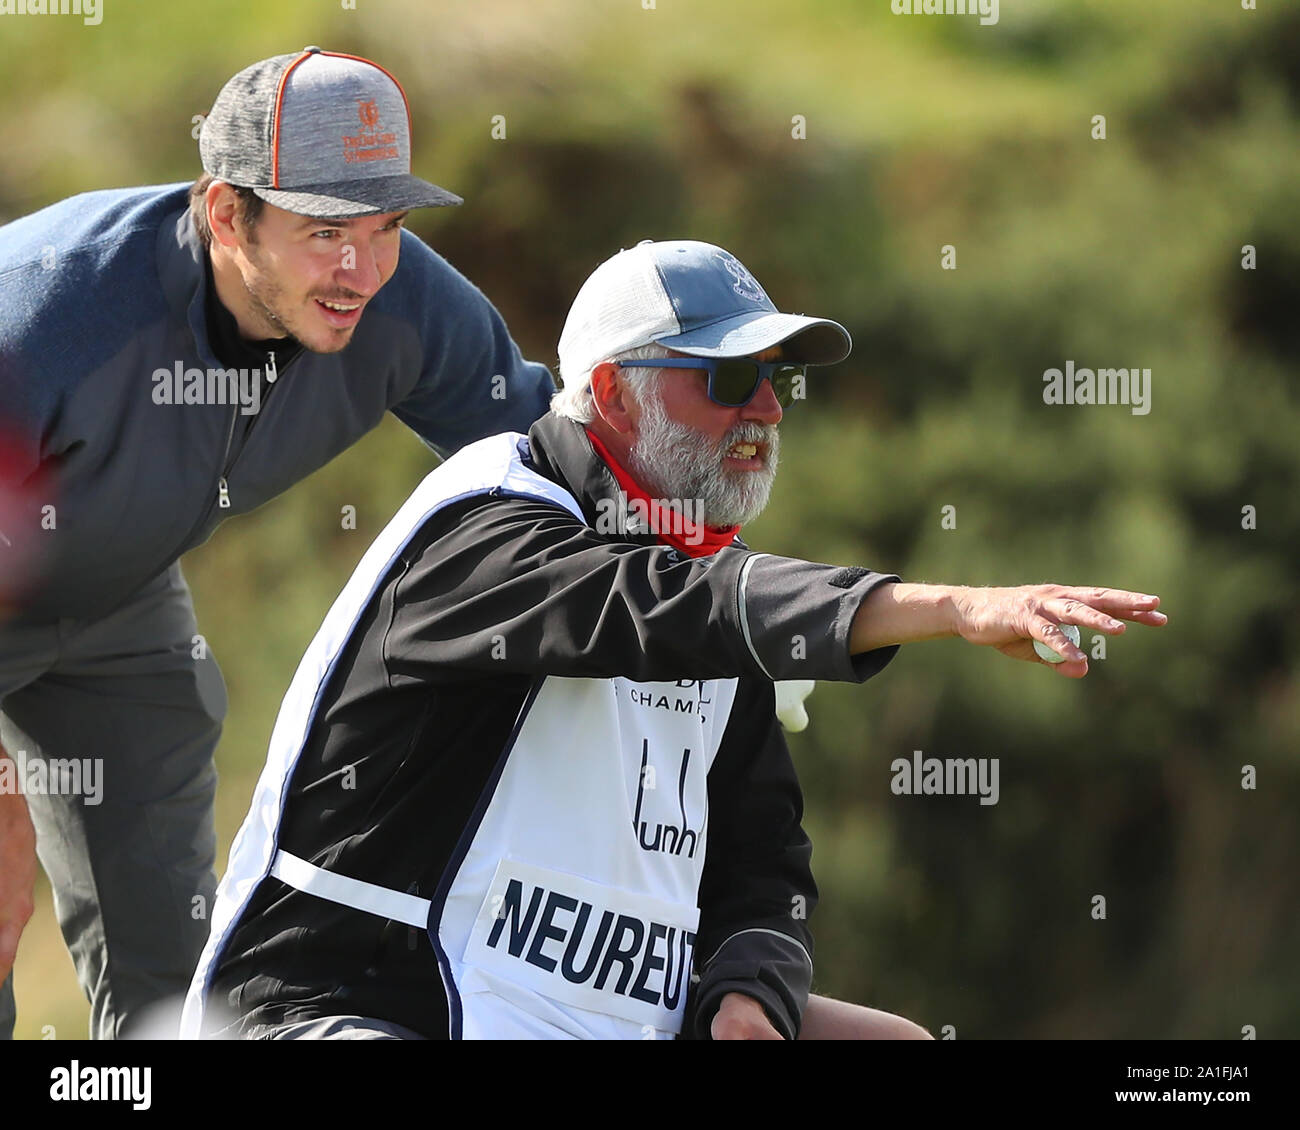 ST ANDREWS, SCOTLAND. 26 SEPTEMBER 2019: Retired ski racer Felix Neureuther of Germany during round one of the Alfred Dunhill Links Championship, European Tour Golf Tournament at St Andrews, Scotland Stock Photo